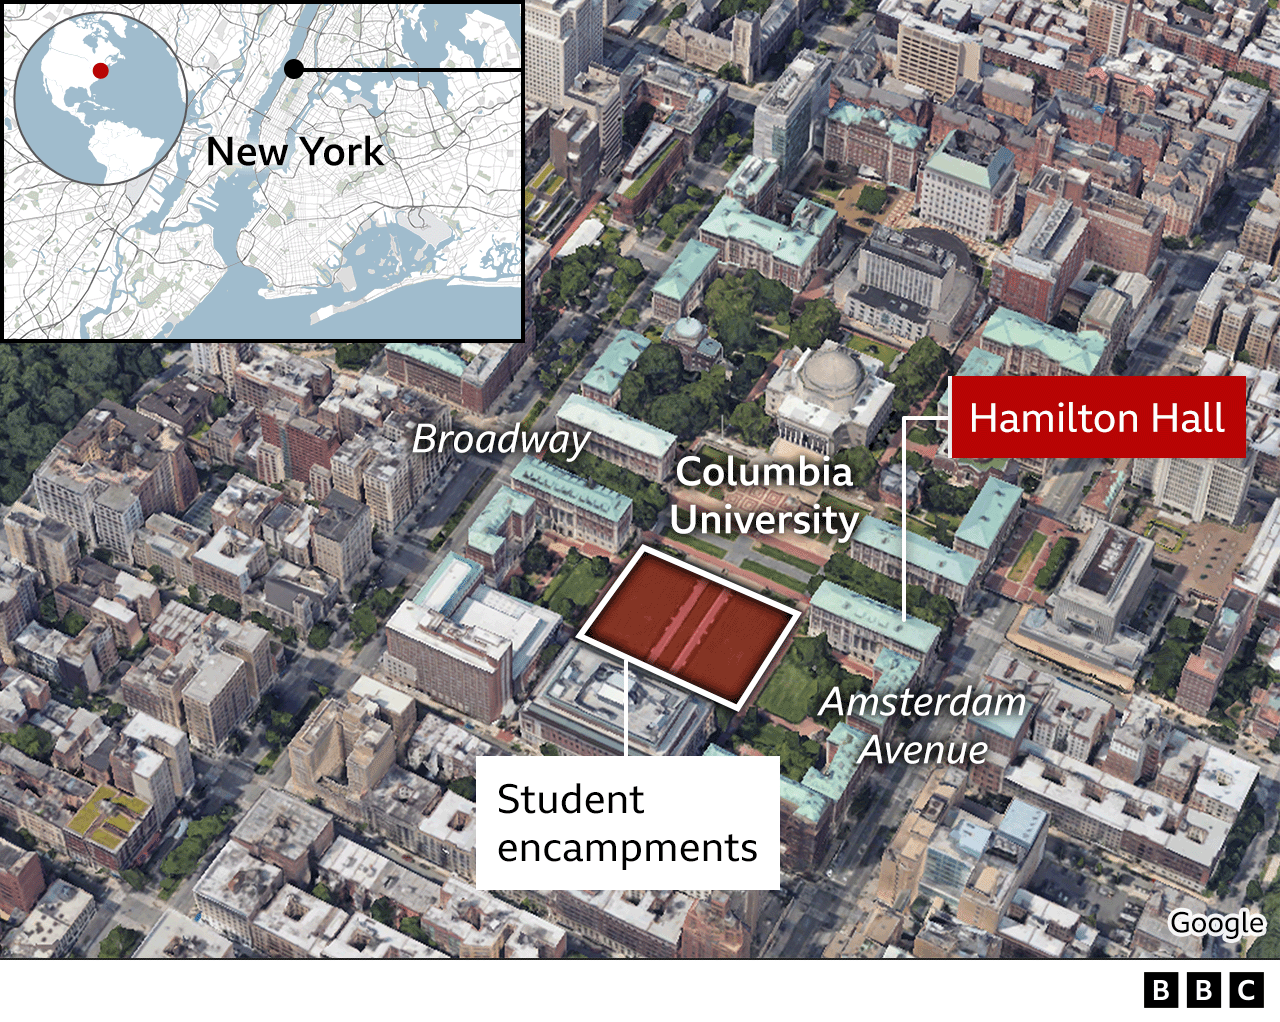 A map showing the New York protests